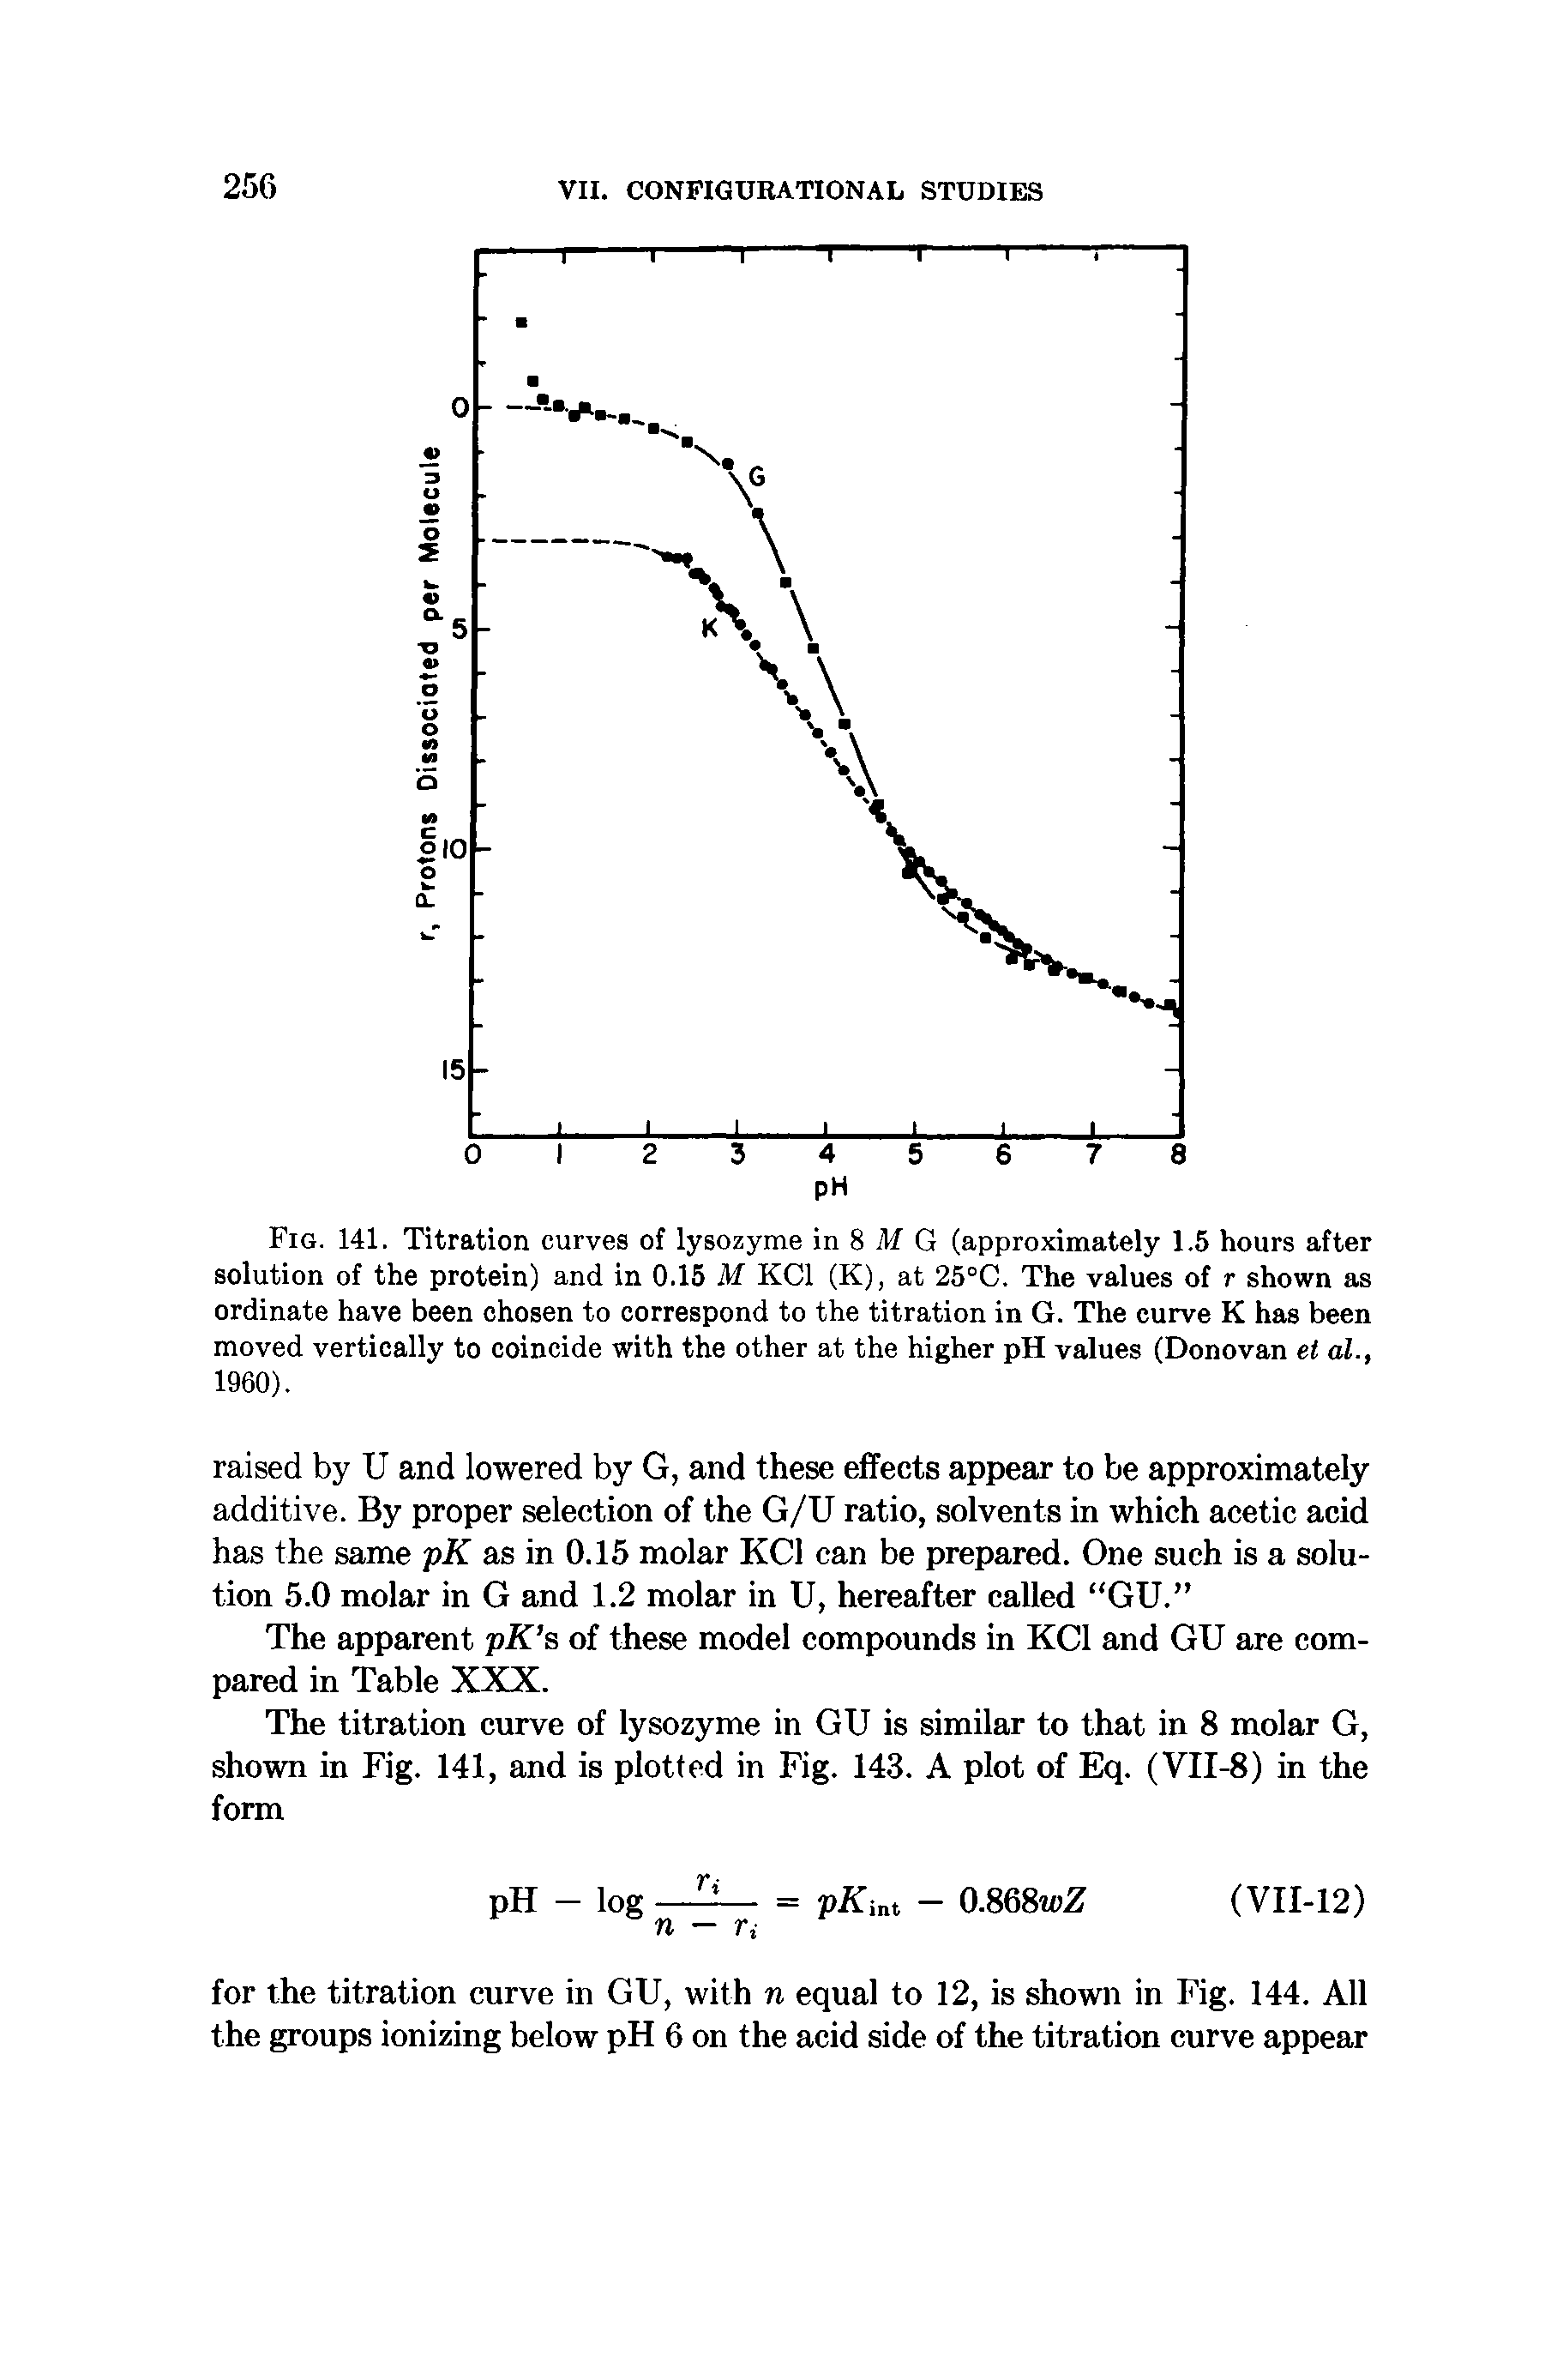 Fig. 141. Titration curves of lysozyme in 8 M G (approximately 1.5 hours after solution of the protein) and in 0.15 M KCl (K), at 25°C. The values of r shown as ordinate have been chosen to correspond to the titration in G. The curve K has been moved vertically to coincide with the other at the higher pH values (Donovan el al.,...